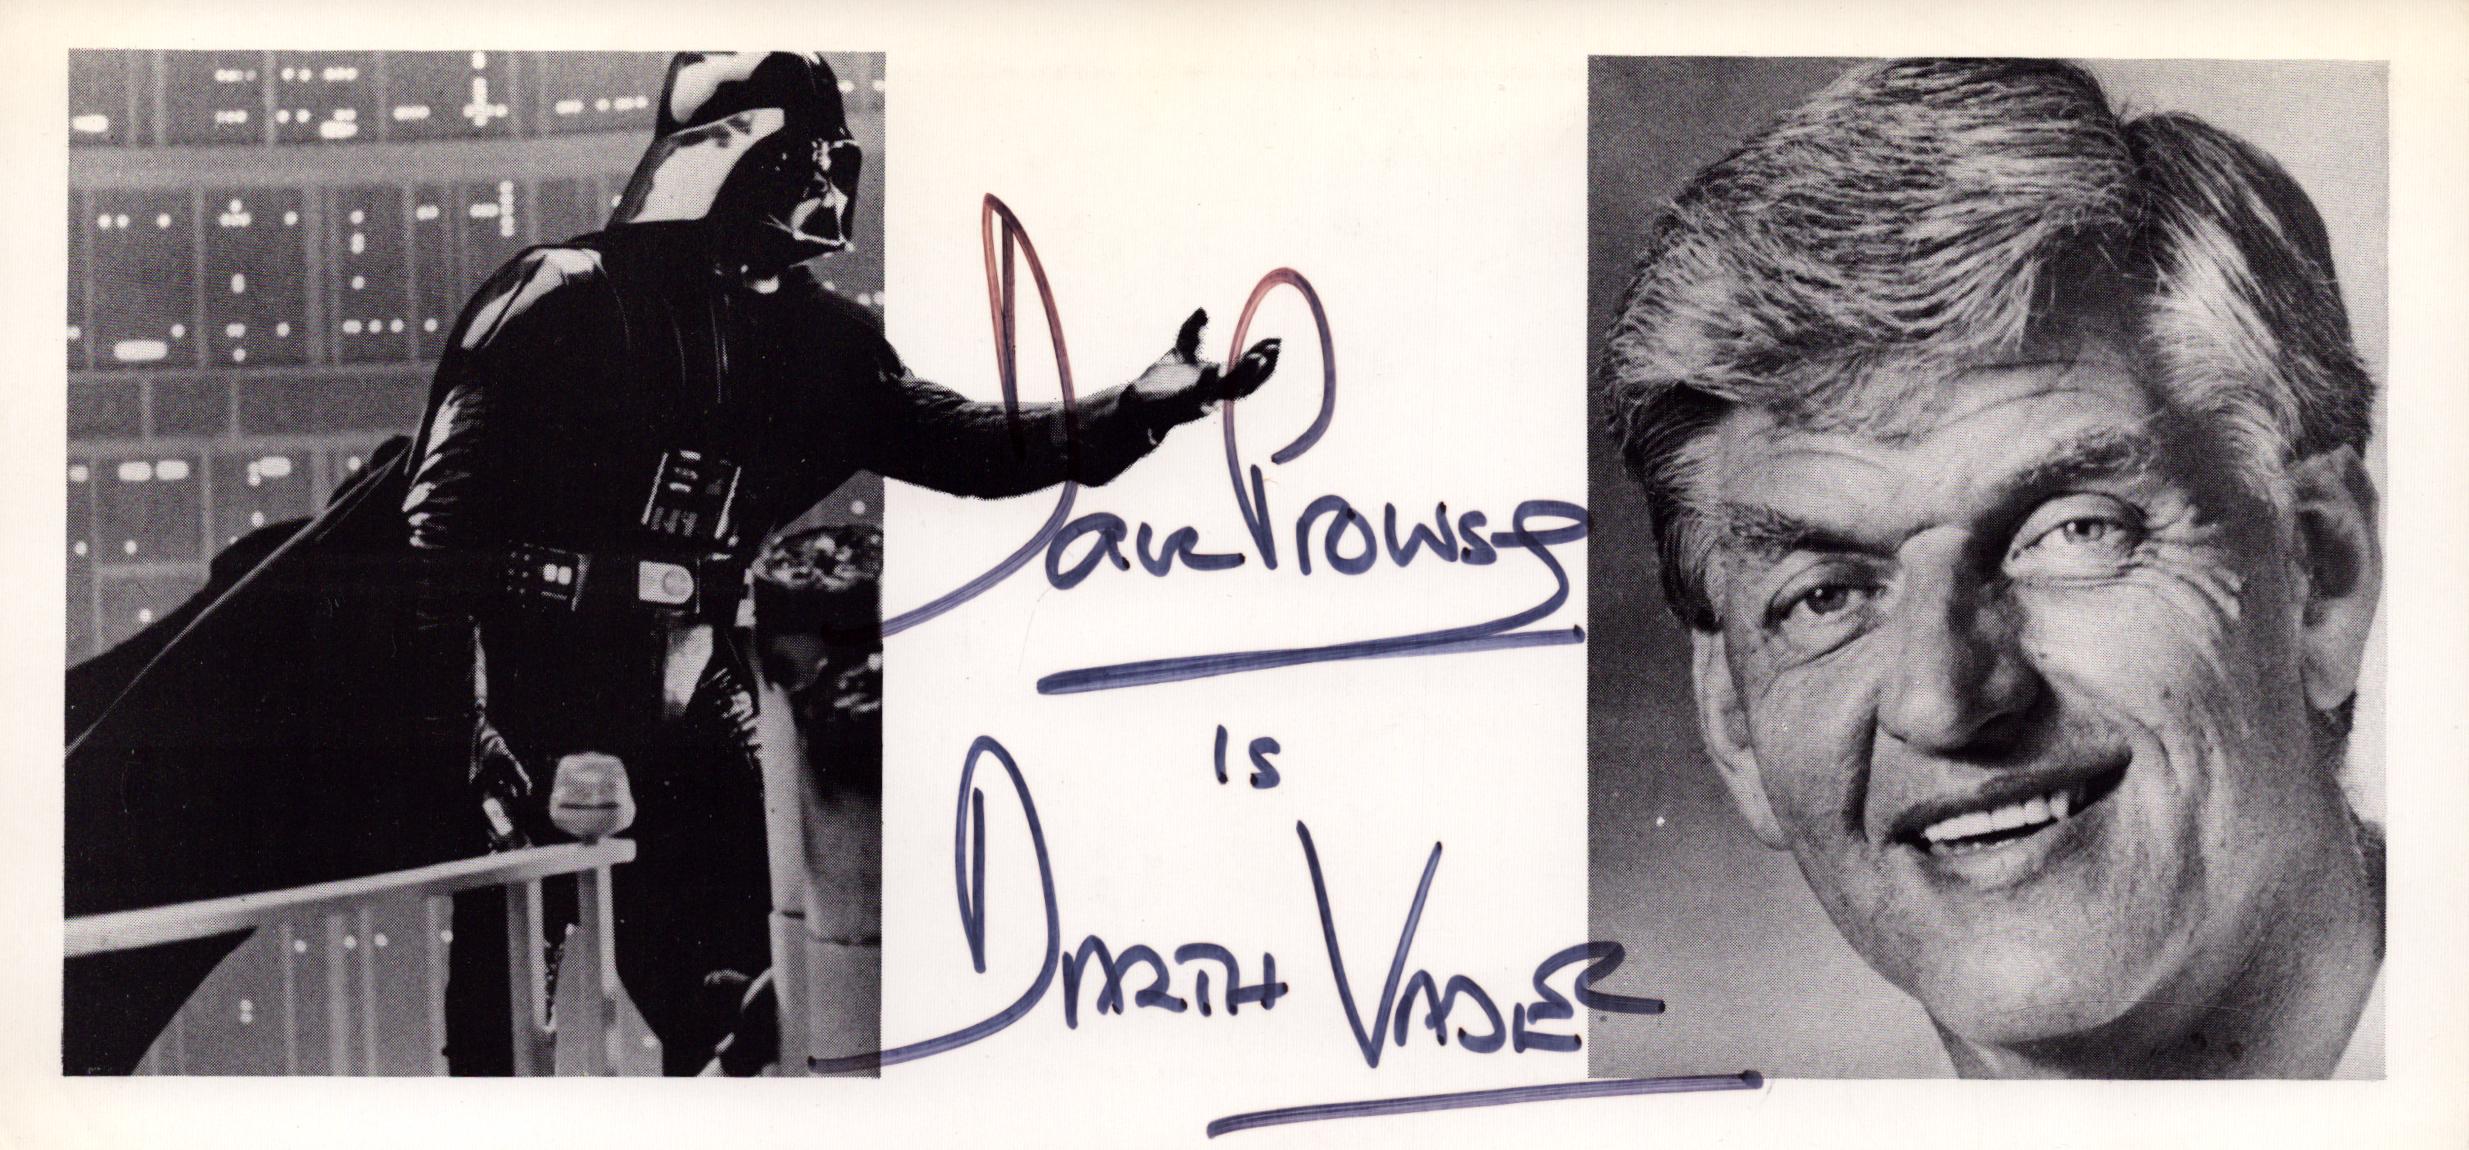 David Prowse signed Darth Vader black and white promo card 8x4 inch in size. Good Condition Est.